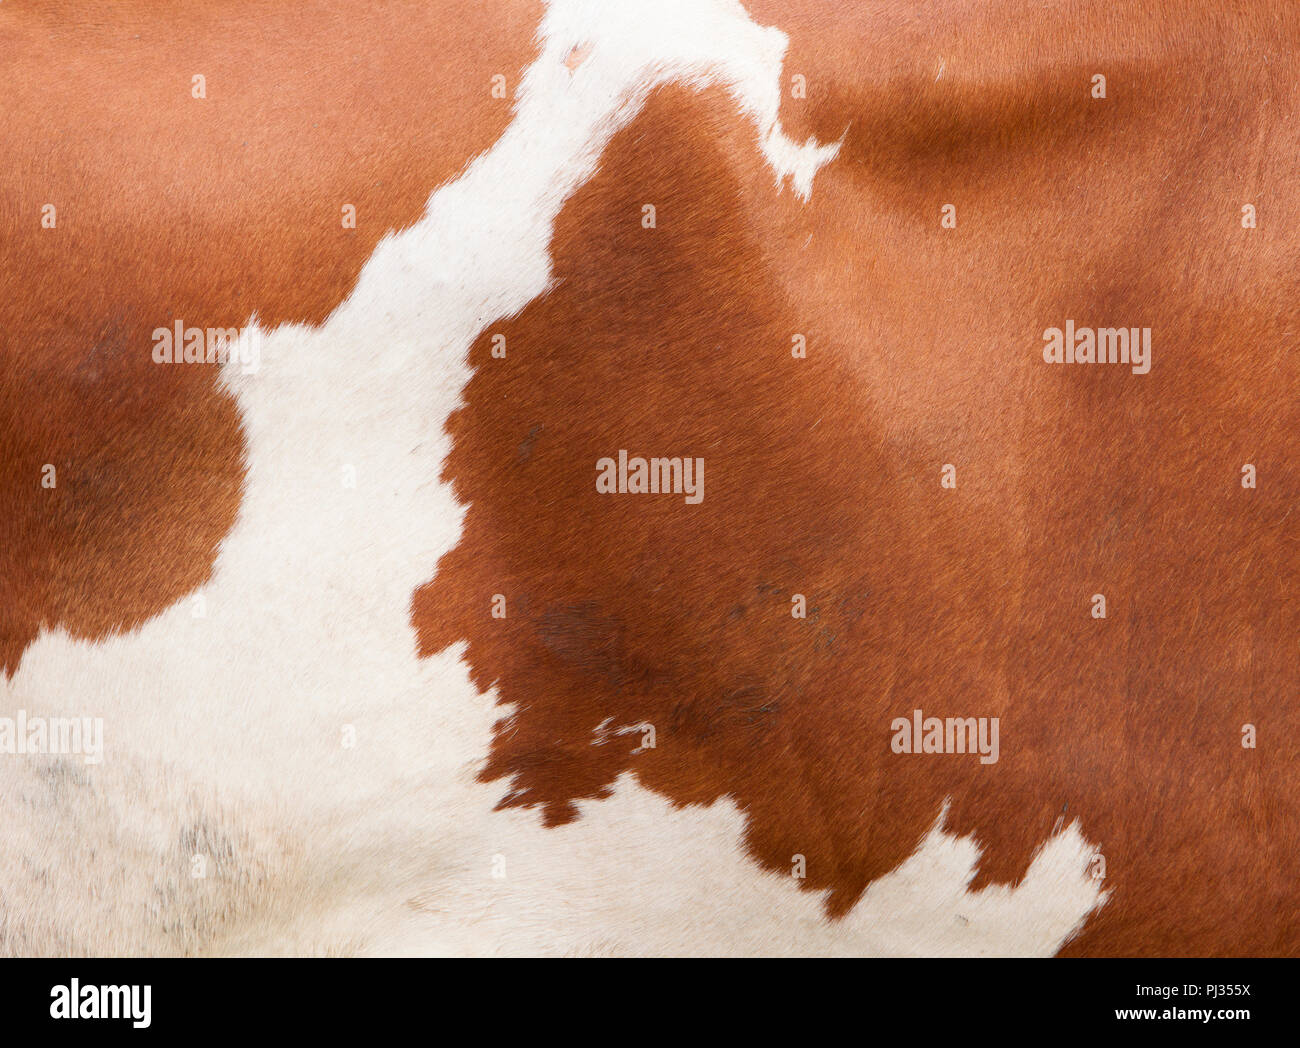 pattern on red and white hide on side of cow Stock Photo